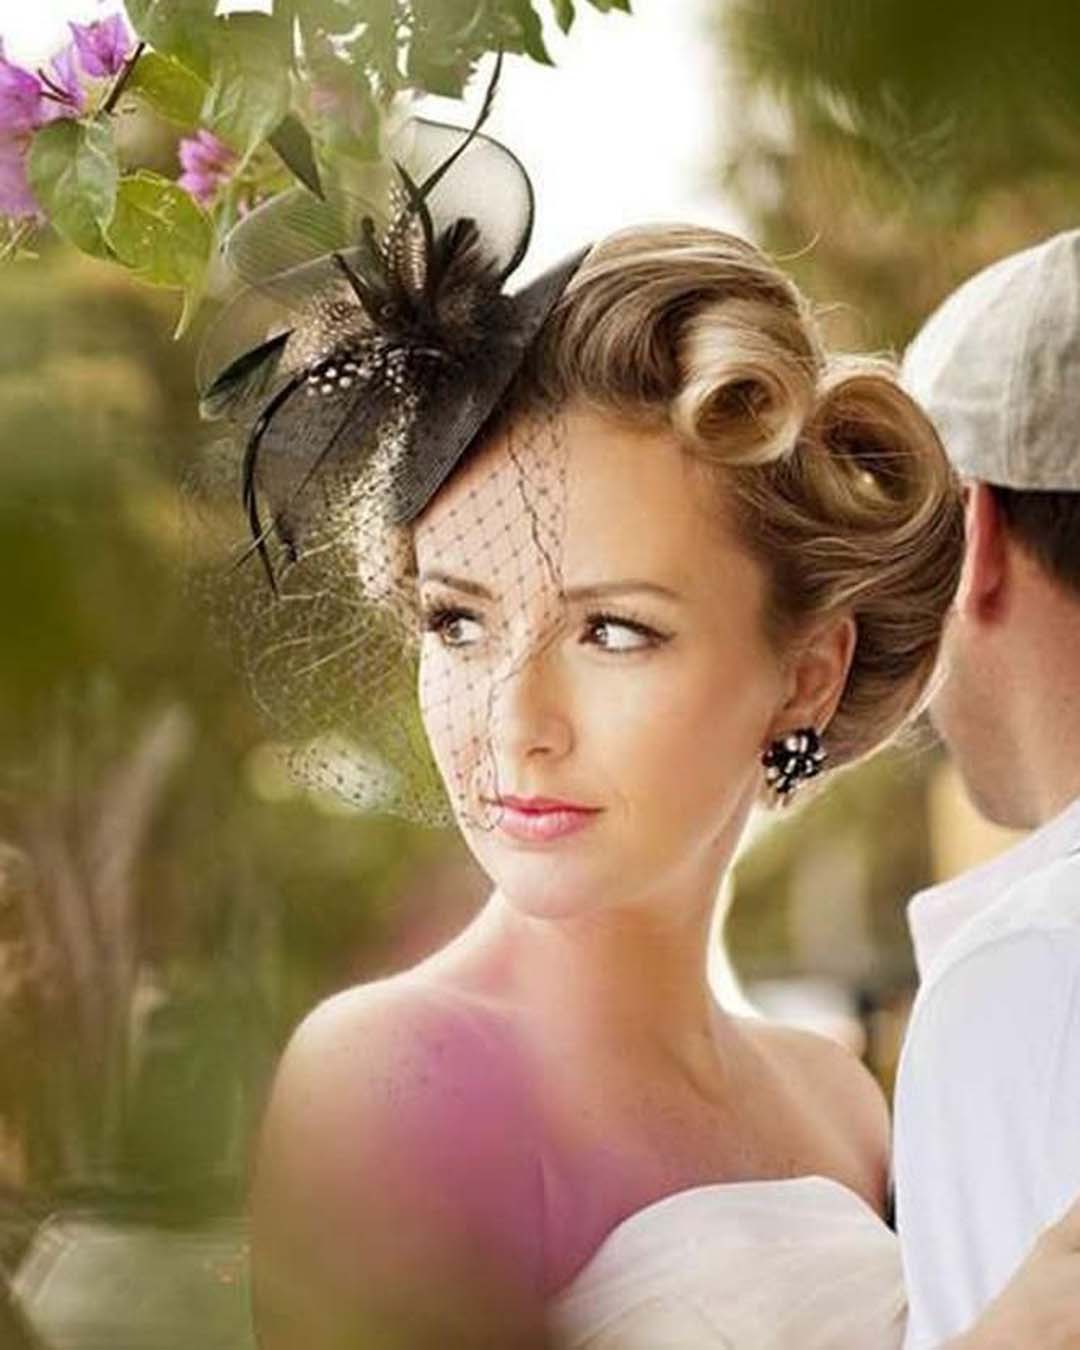 vintage wedding hairstyles updo with rolls and hat stephan maloman